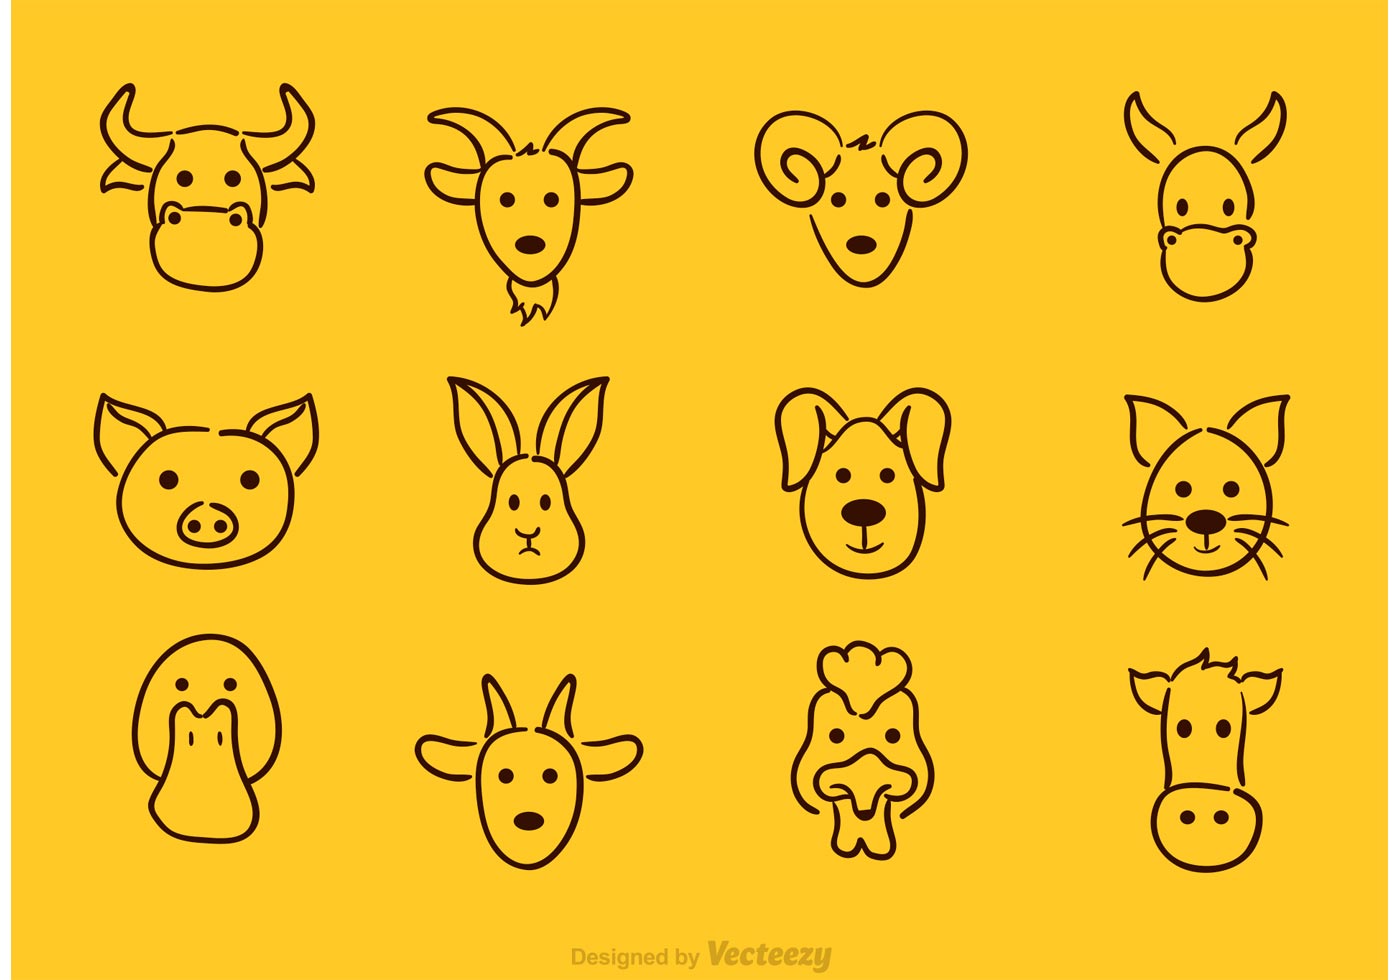 Vector Animal Face Drawing Icons - Download Free Vector Art, Stock